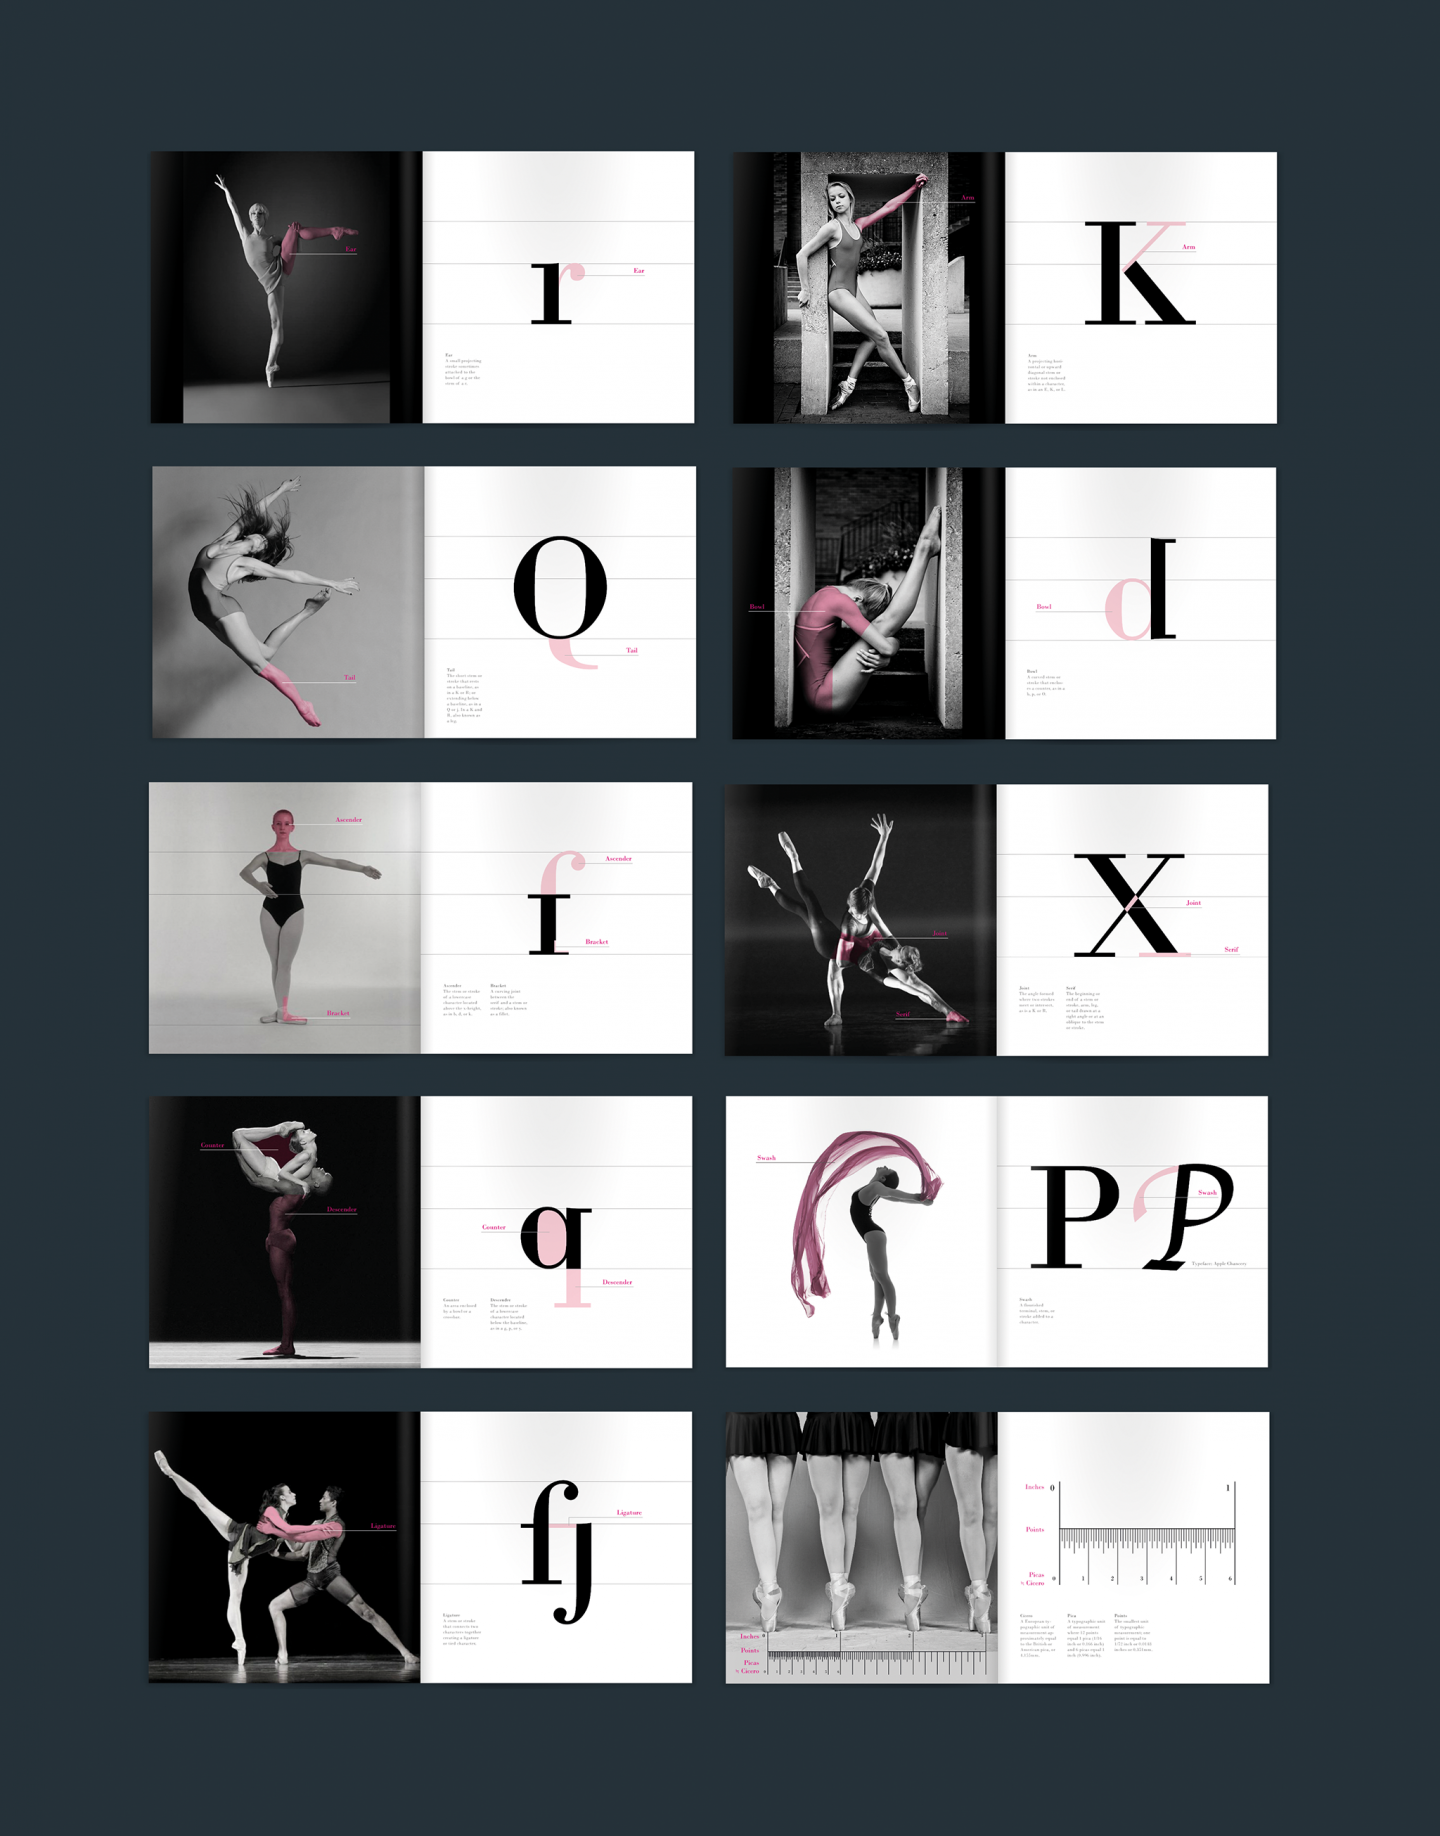 Anatomy of Letterforms